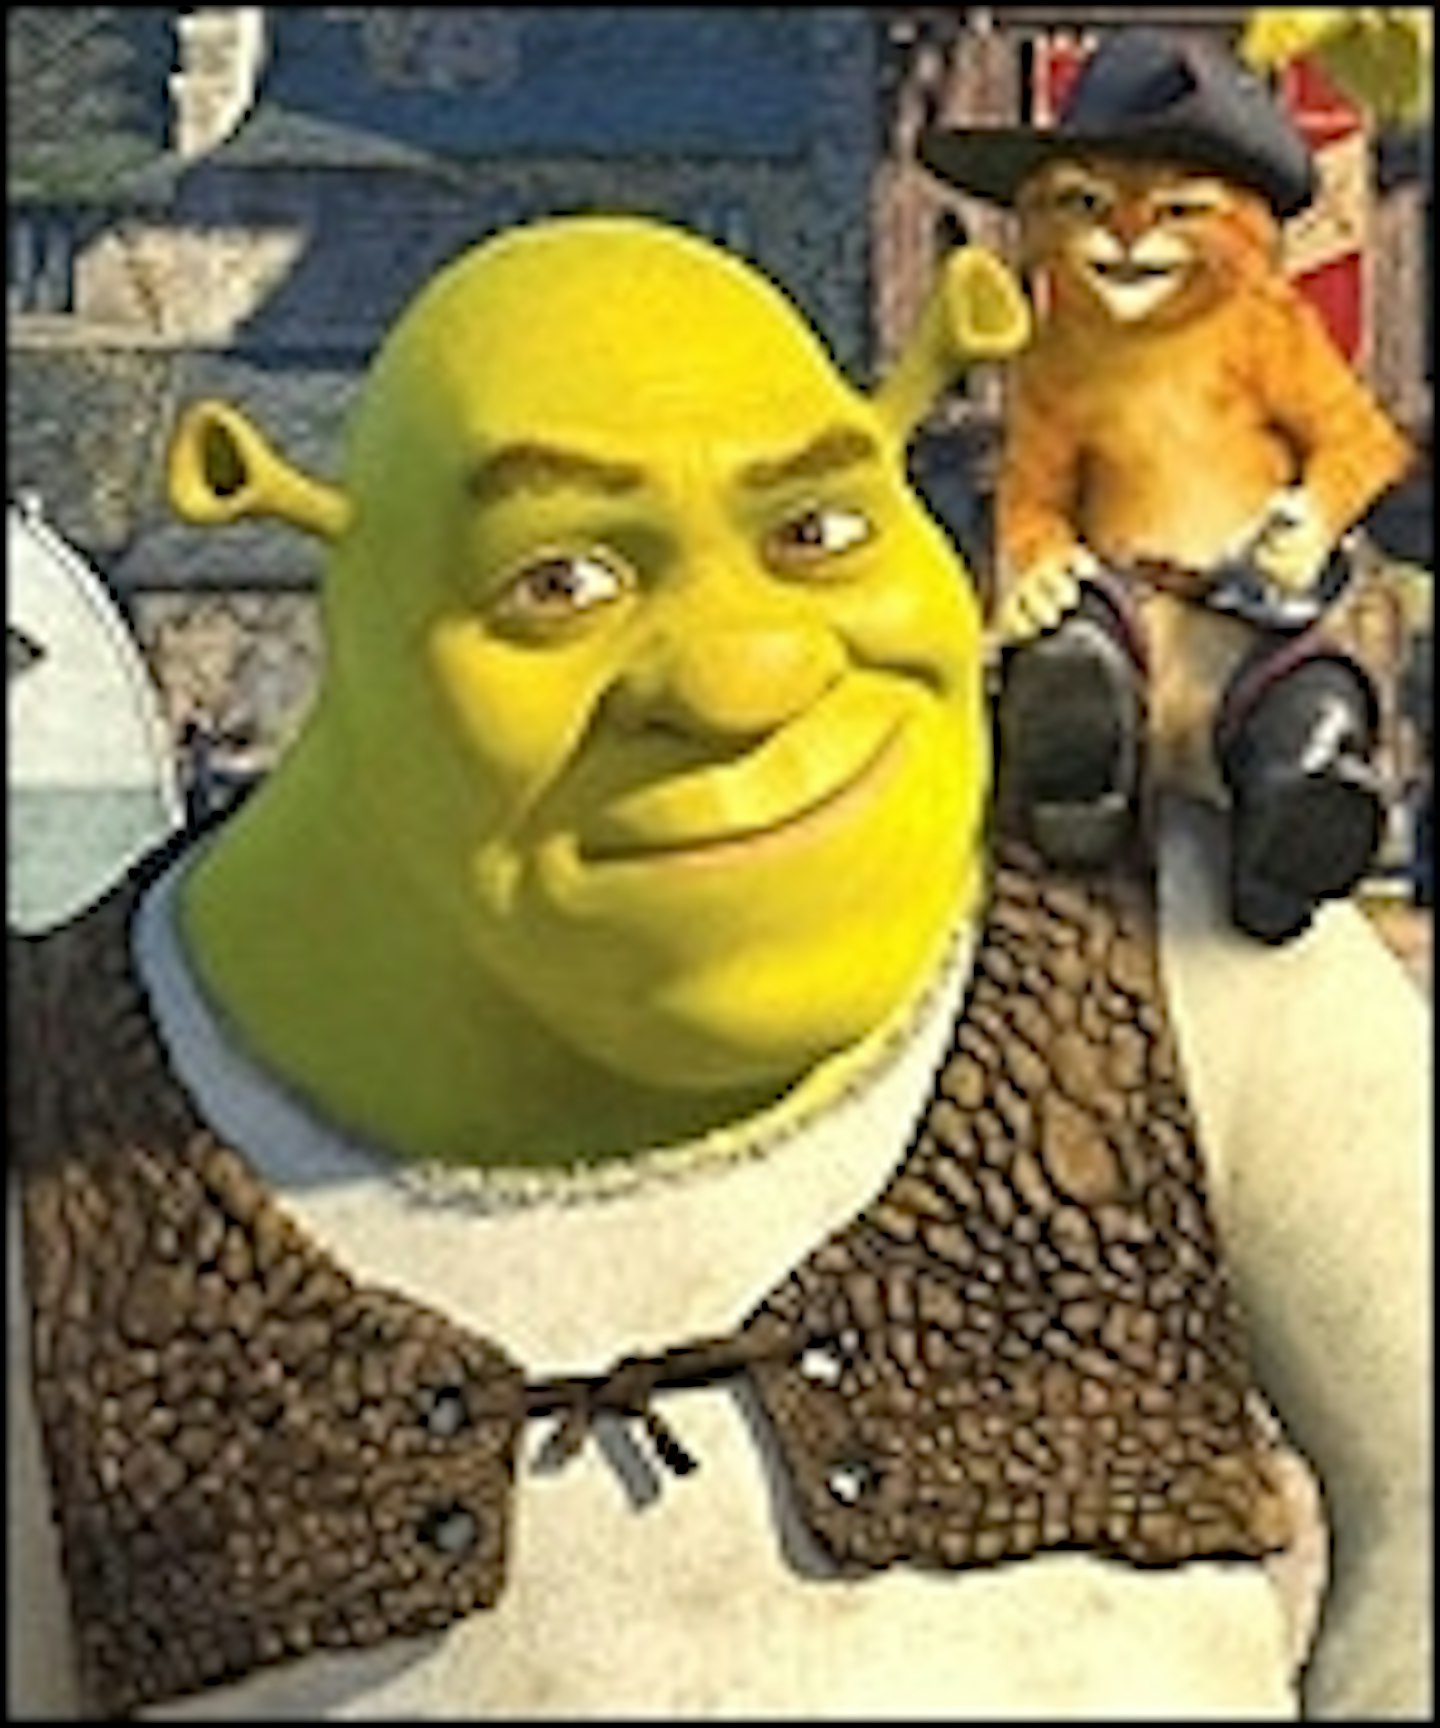 Mike Mitchell To Direct Shrek 4